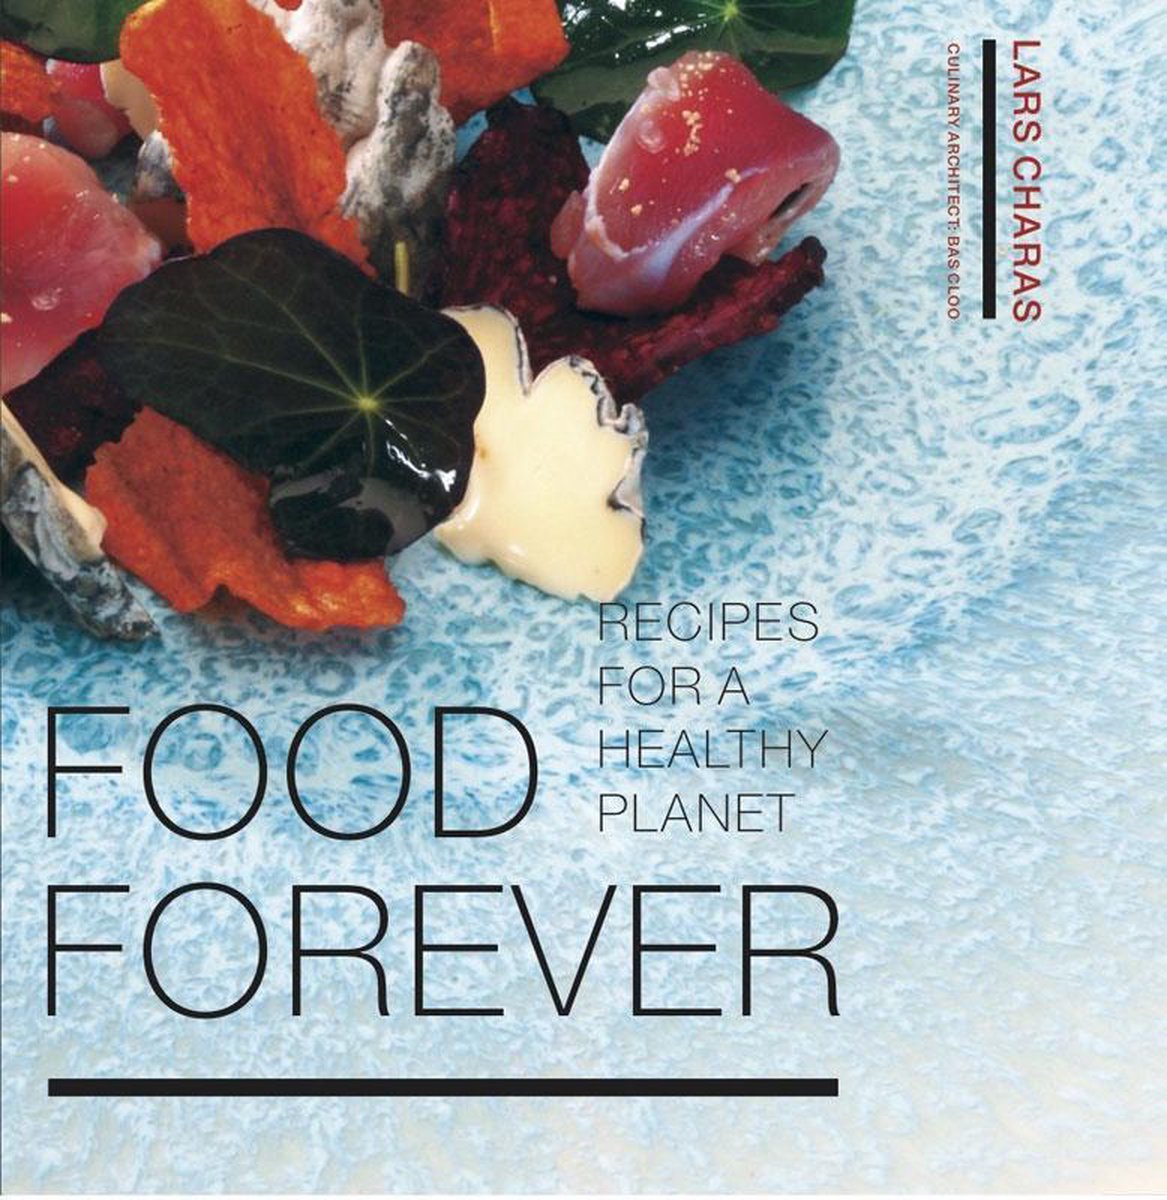 Food Forever, recipes for a healthy planet